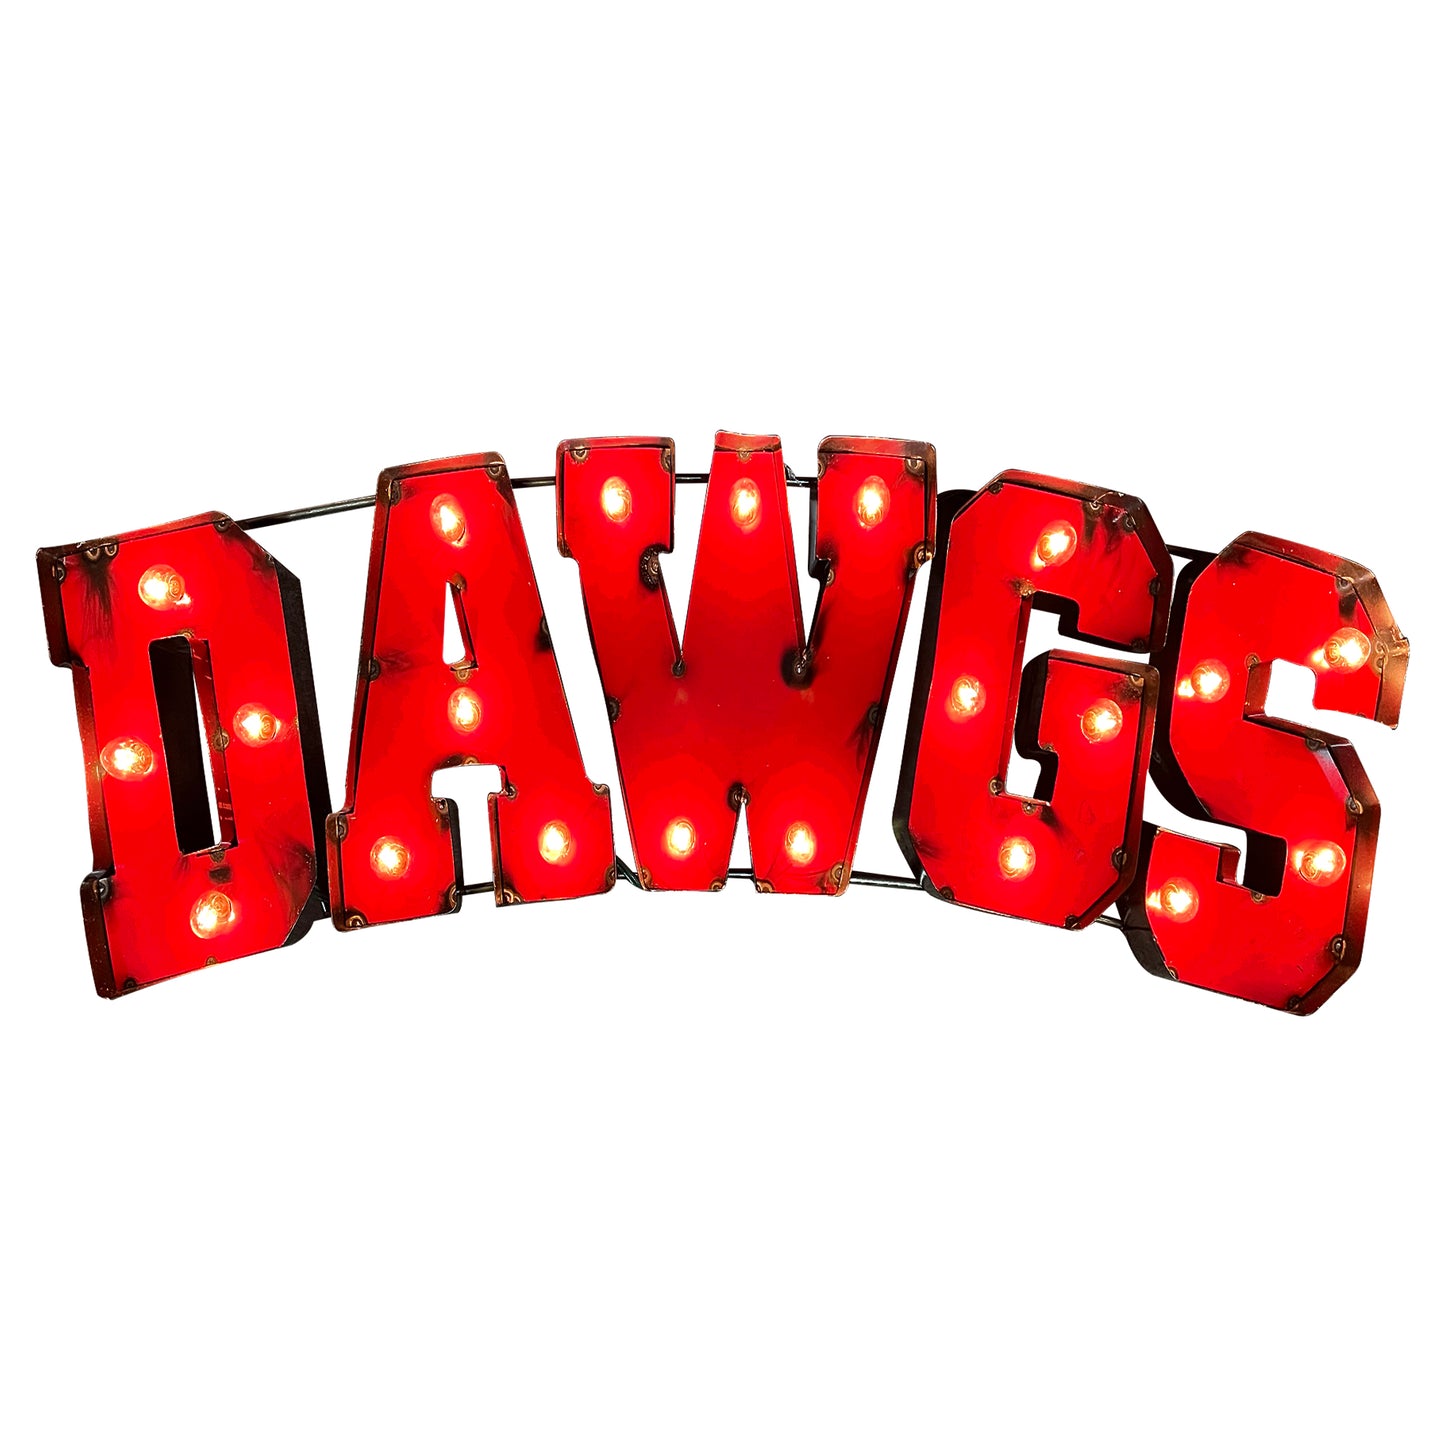 University of Georgia "Dawgs" Lighted Recycled Metal Wall Decor